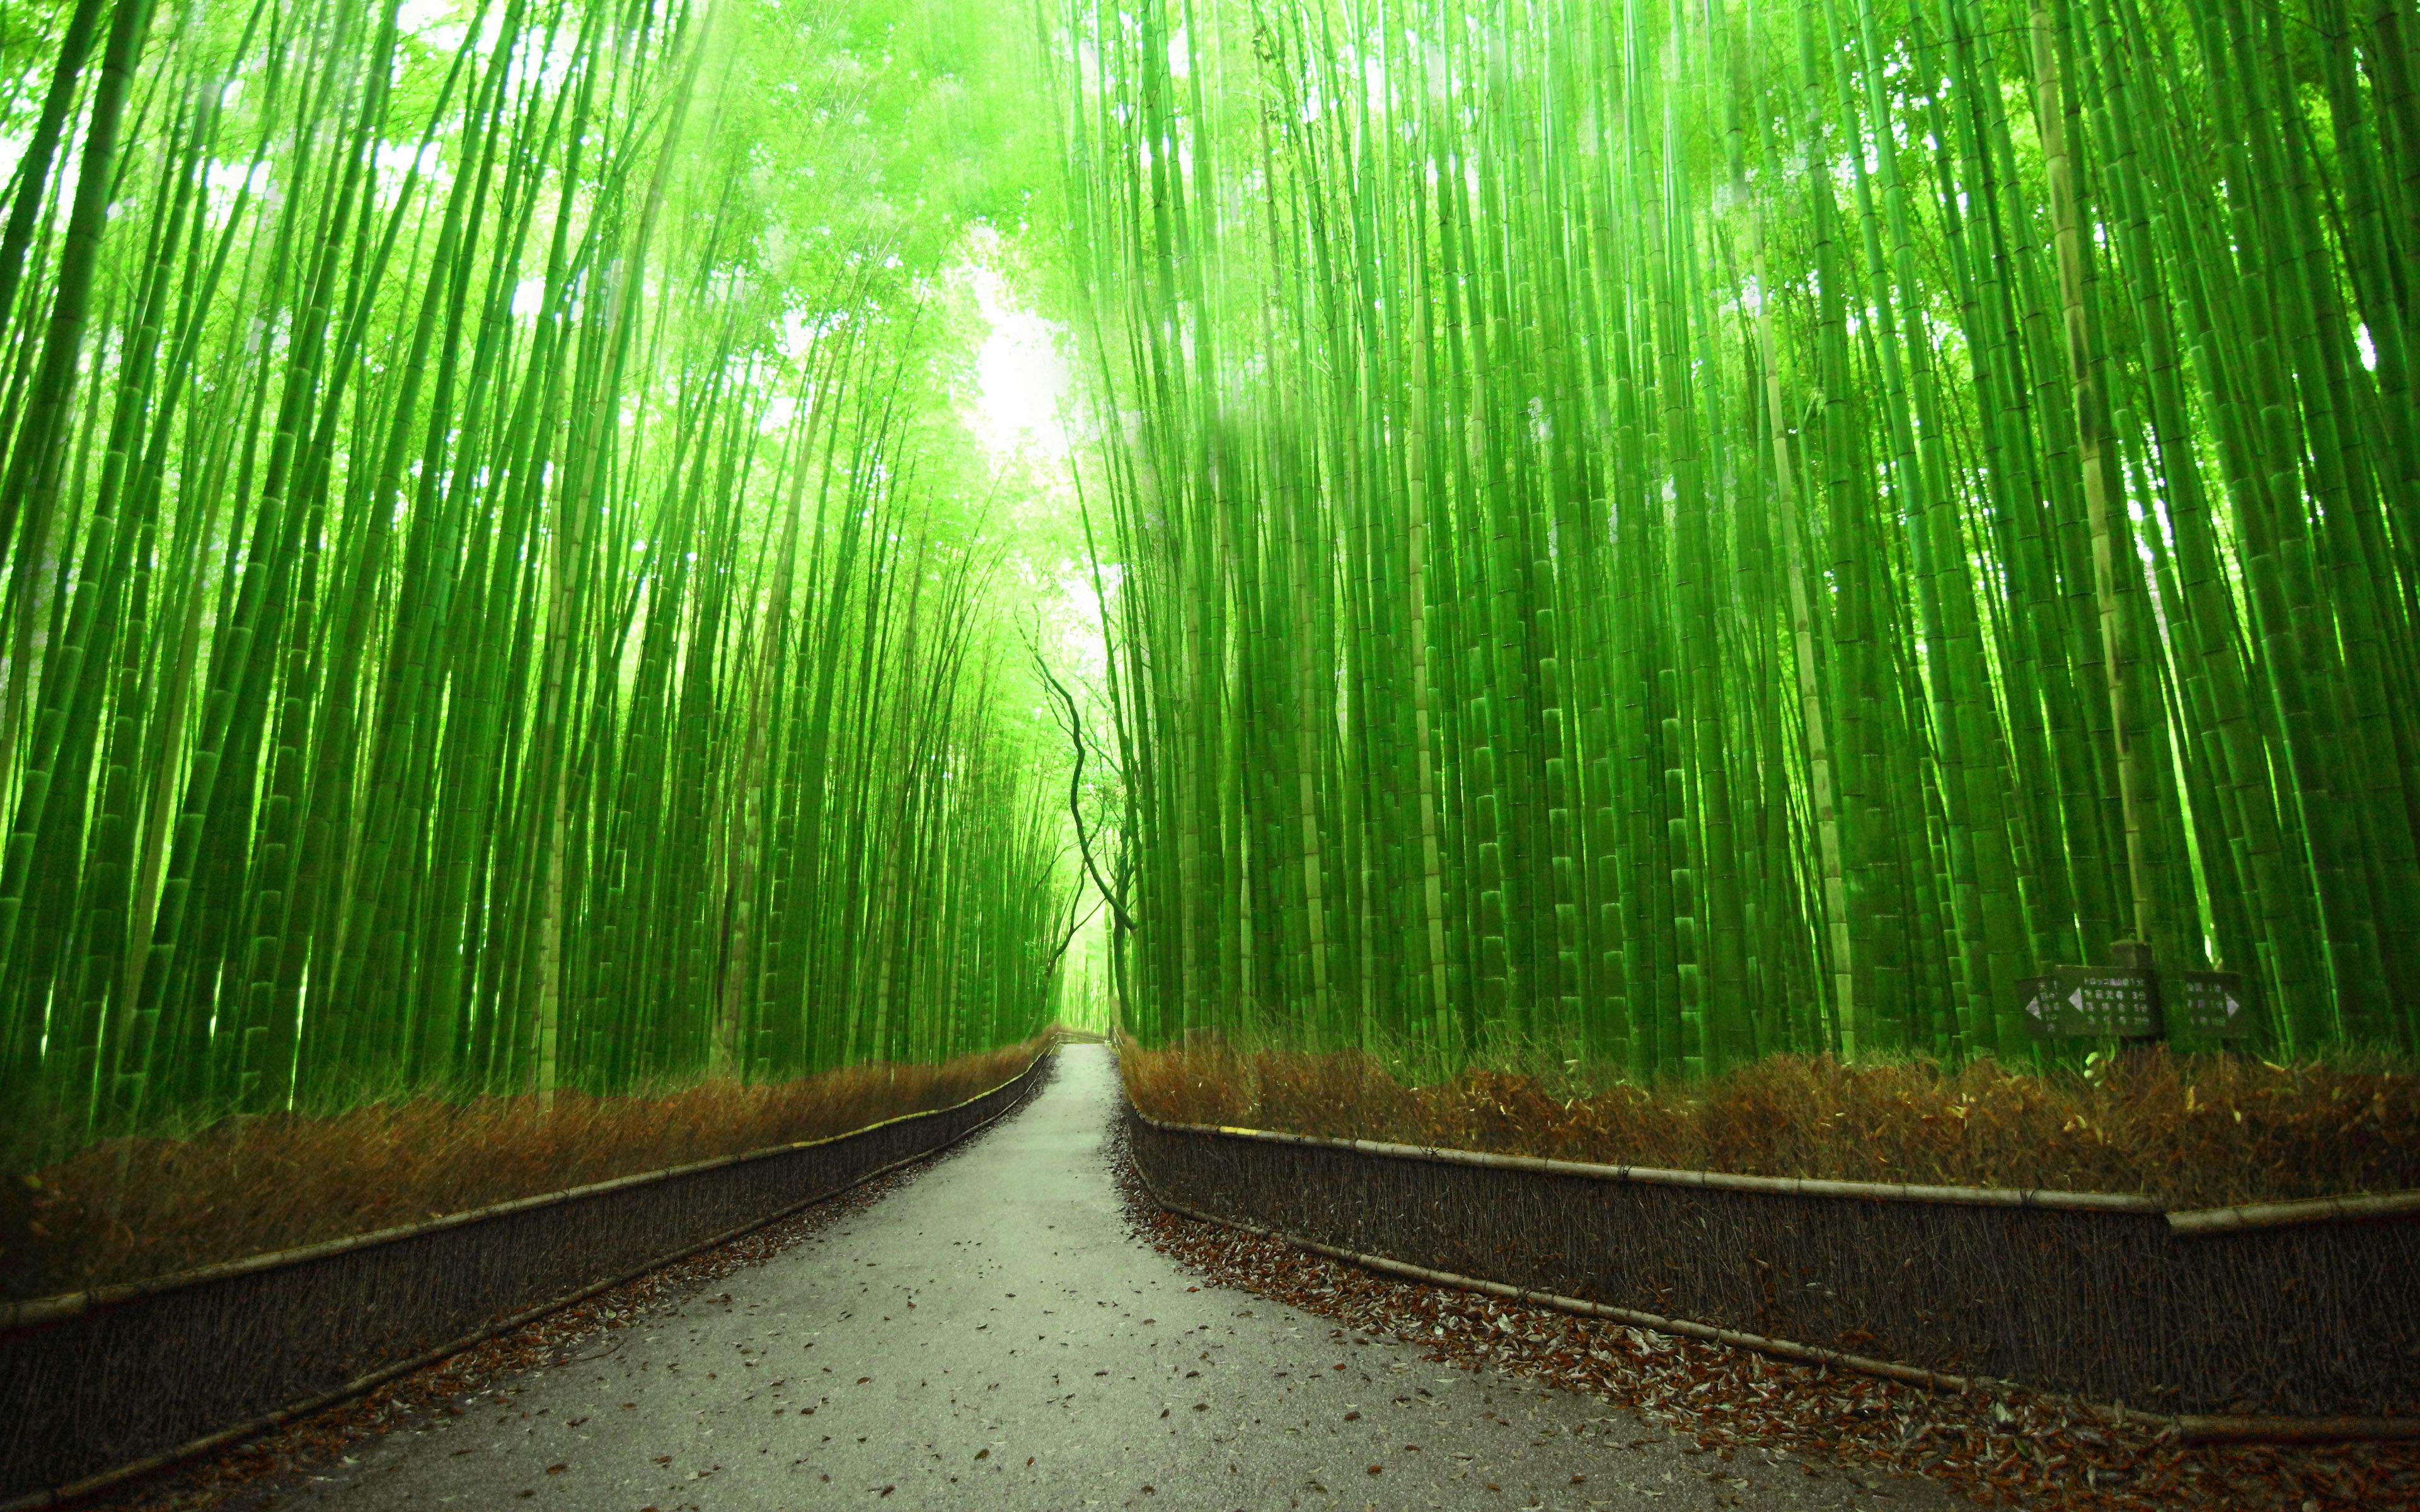 Bamboo Forest Wallpaper Free Bamboo Forest